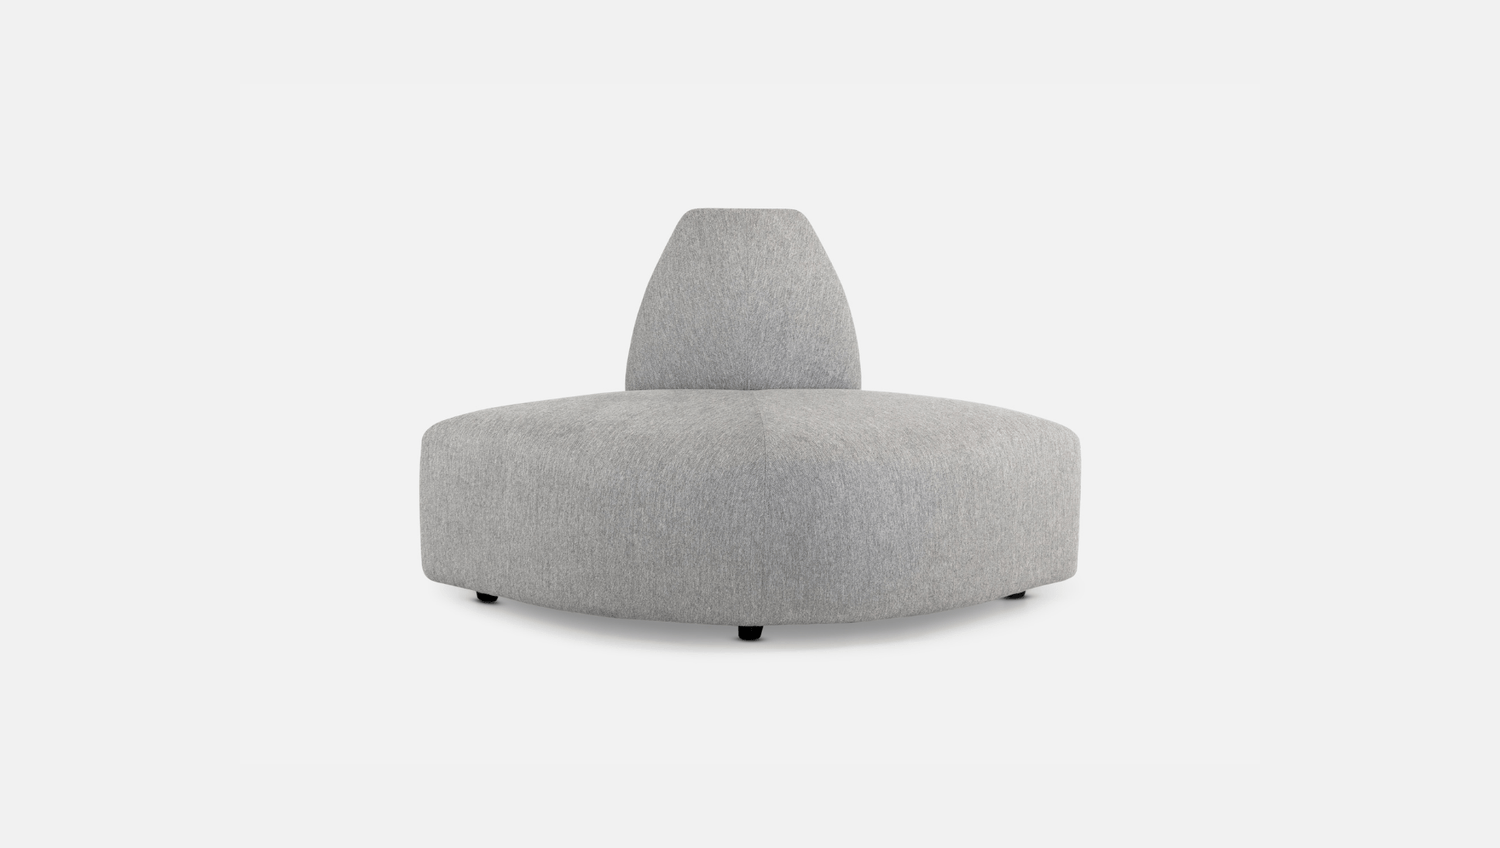 Soft Seating Curved Quarter Marseille Modular Seating